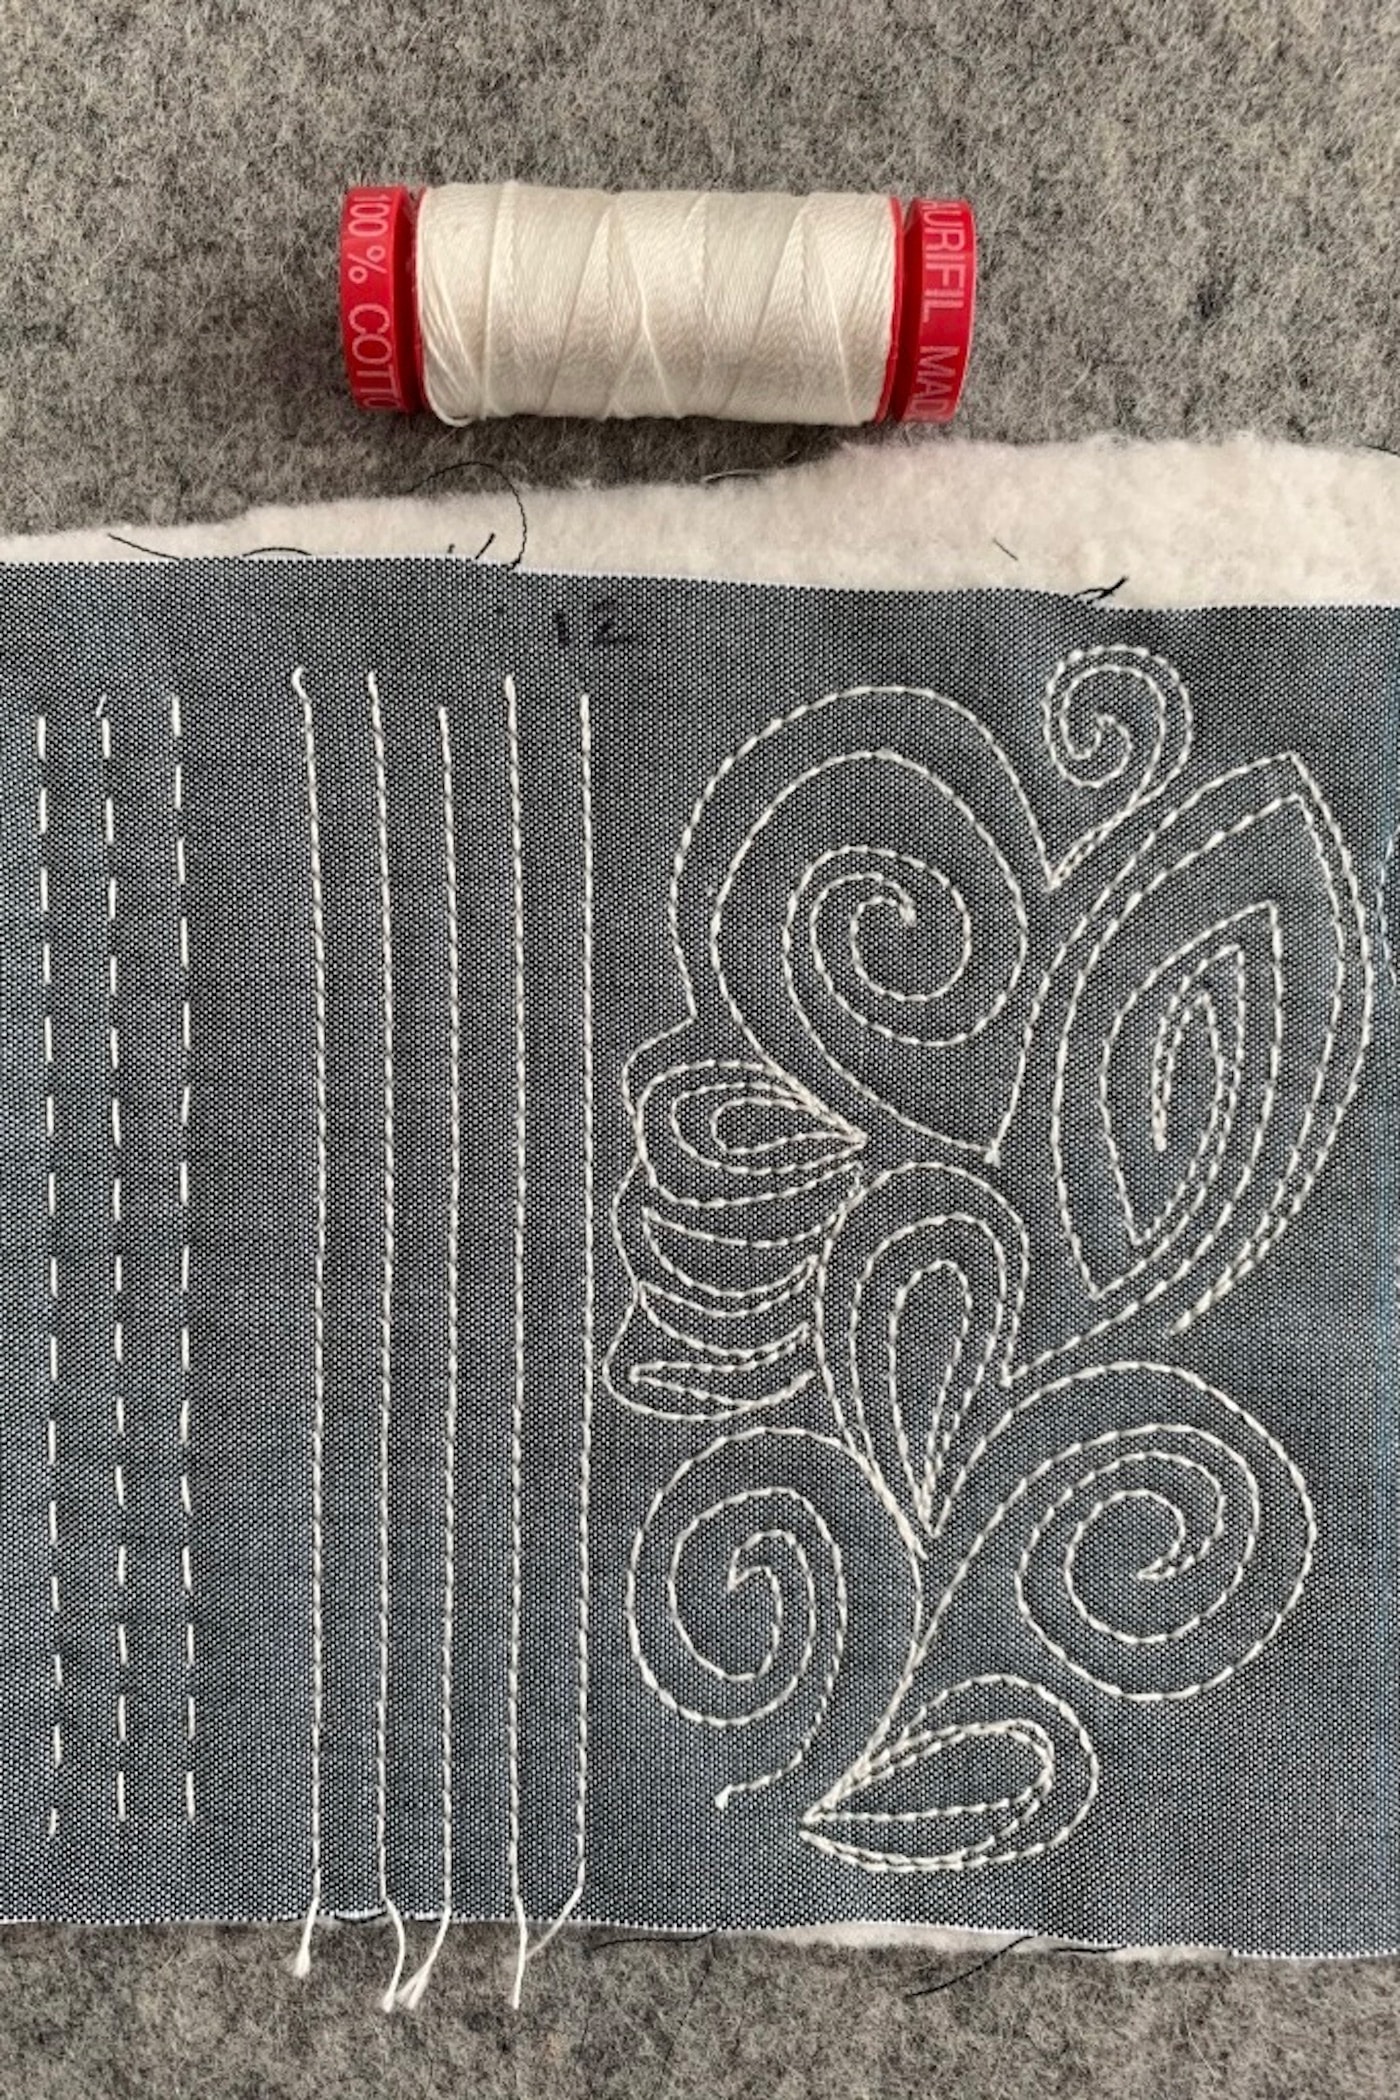 close up of ivory thread on gray fabric, machine quilted